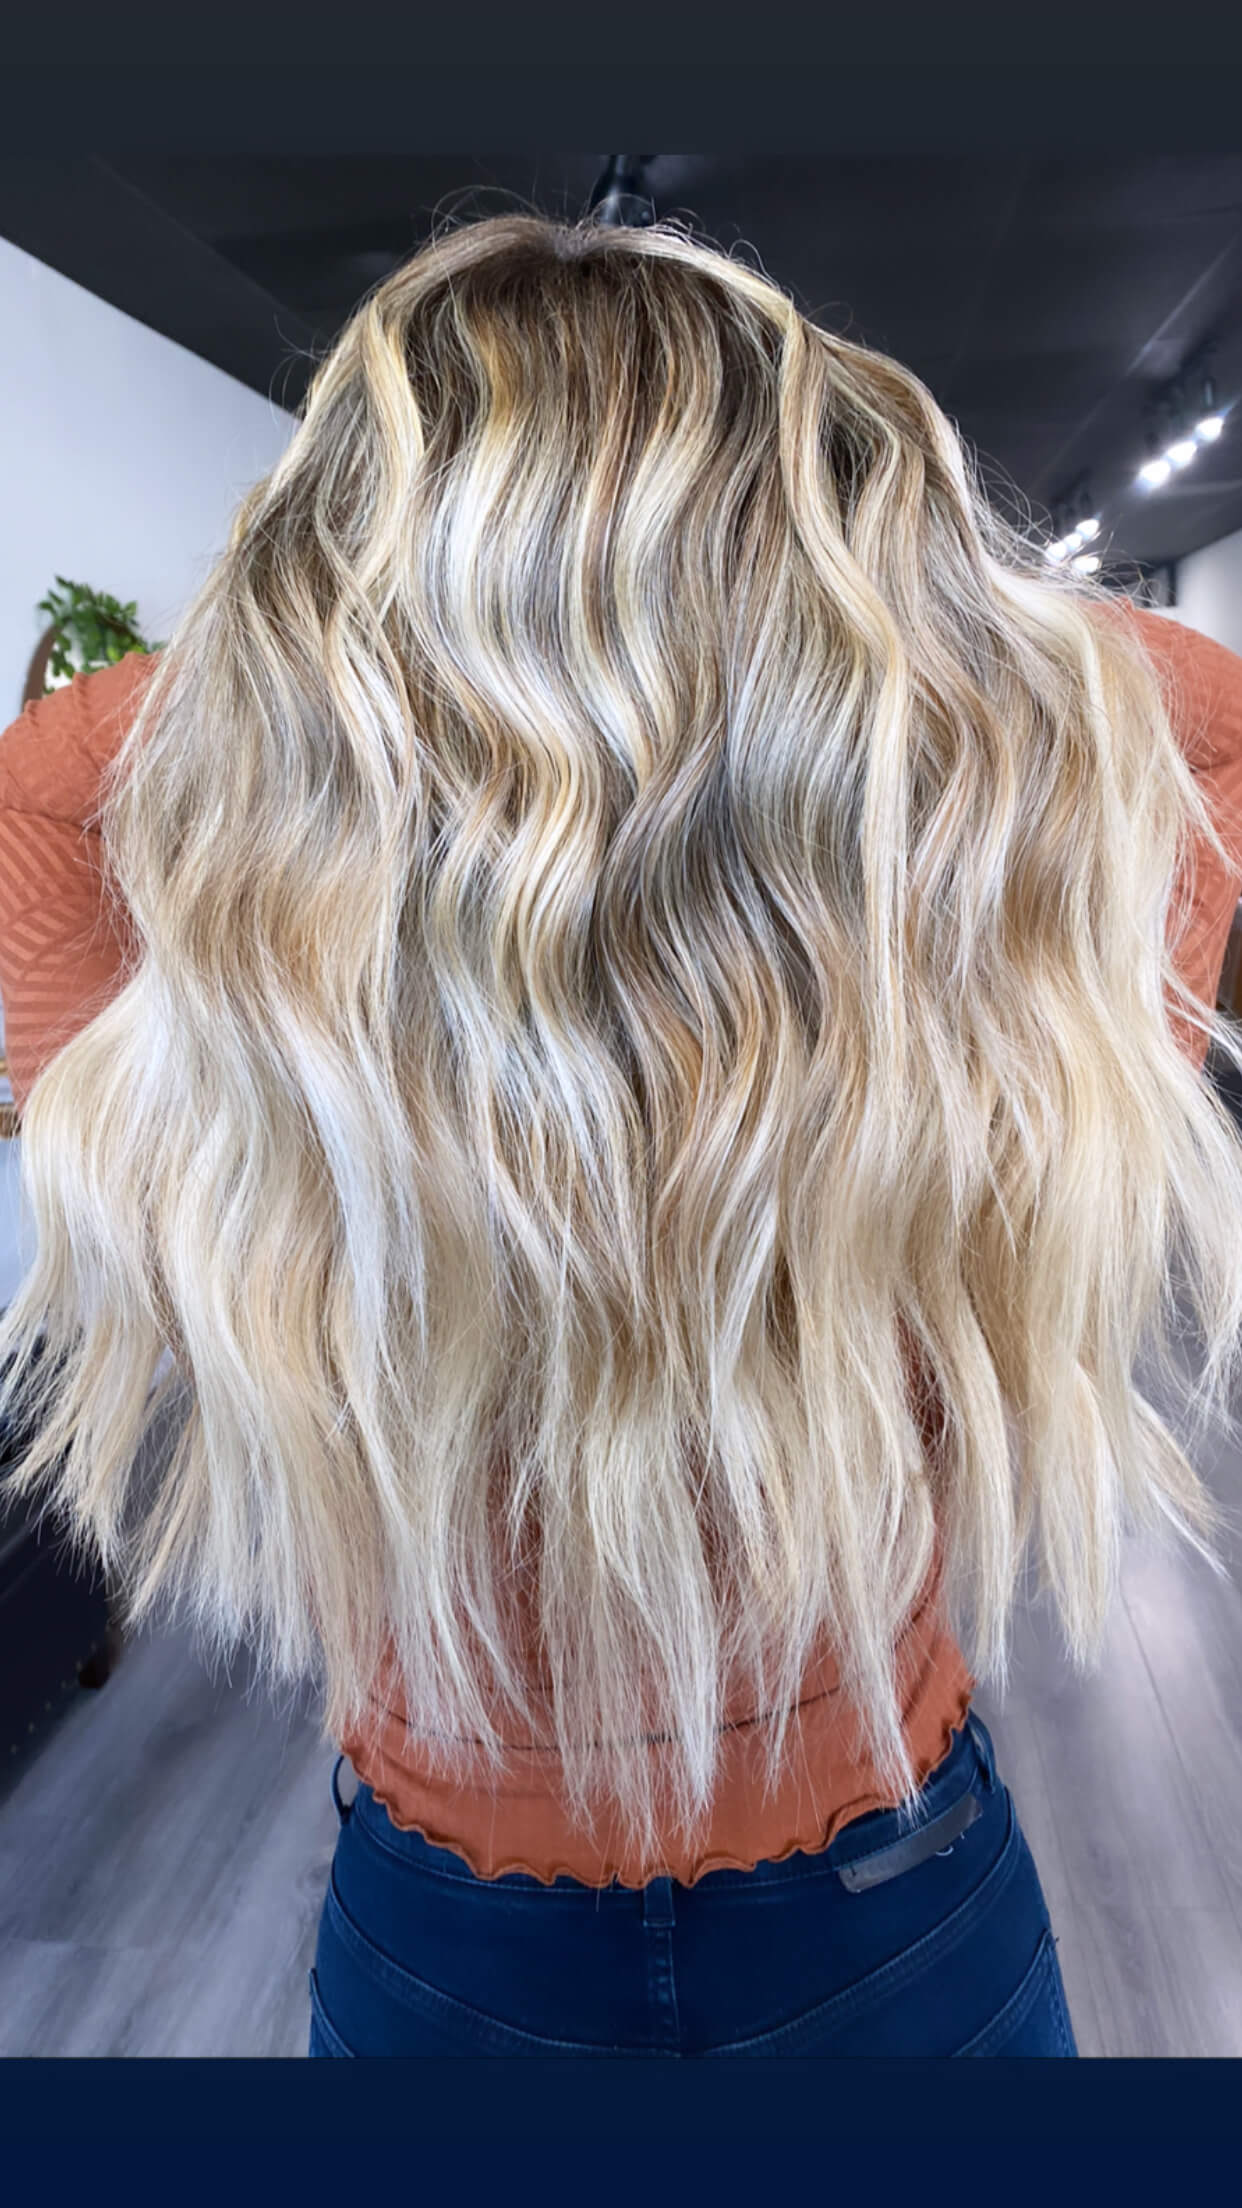 Balayage hair style from Christian Michael Salon in Orange County, CA